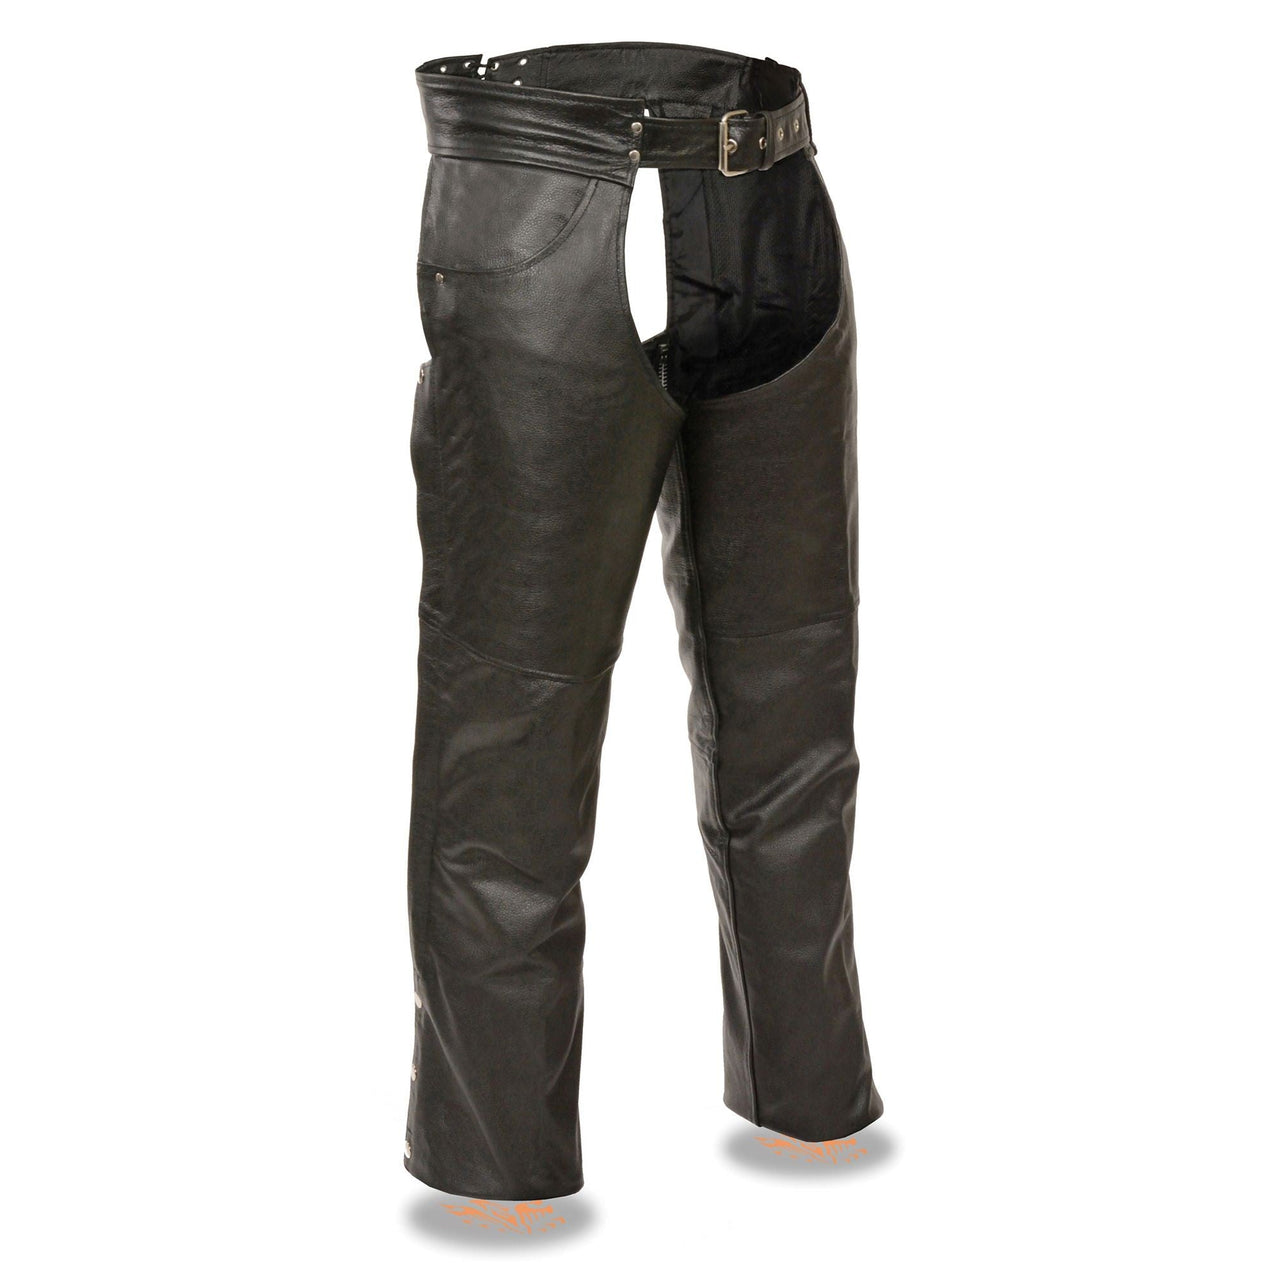 Men's Classic Chap w/ Jean Pockets - HighwayLeather